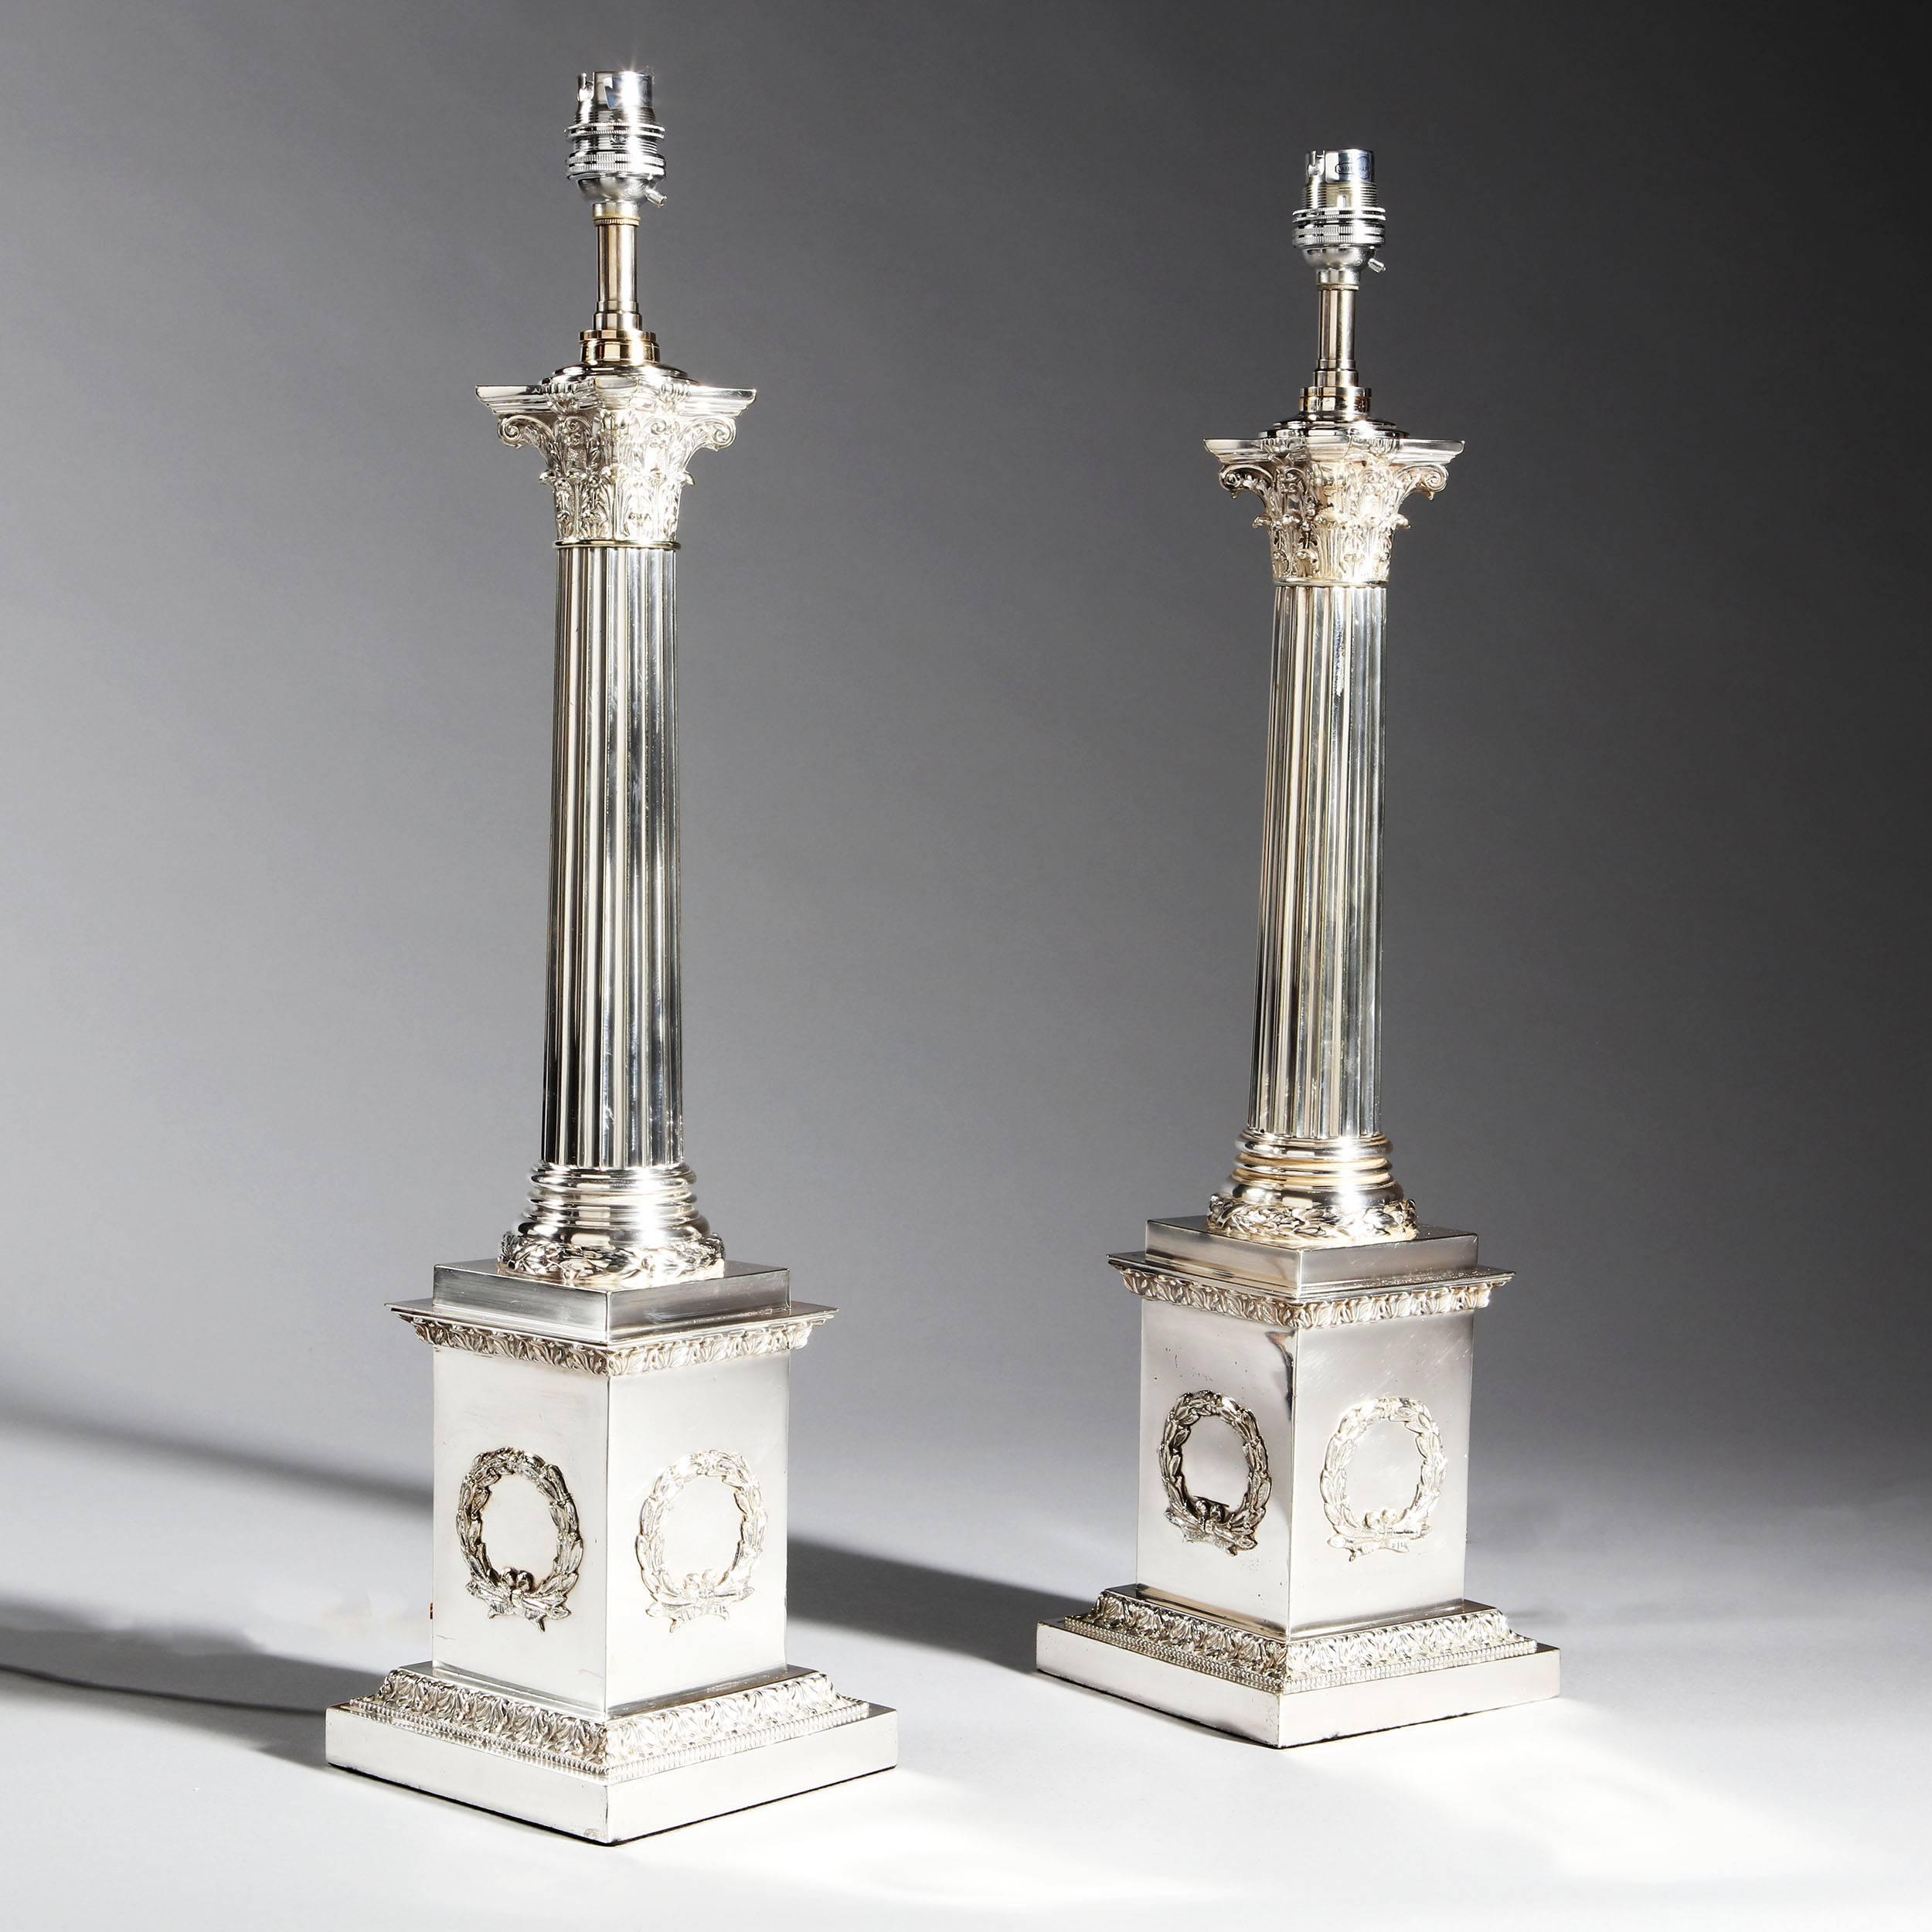 Pair of turn of the century silver plate Corinthian column lamps of exceptional quality. Retaining their original surface, these lamps have been hardly touched in 100 years. They are in perfect original condition, just rewired for modern